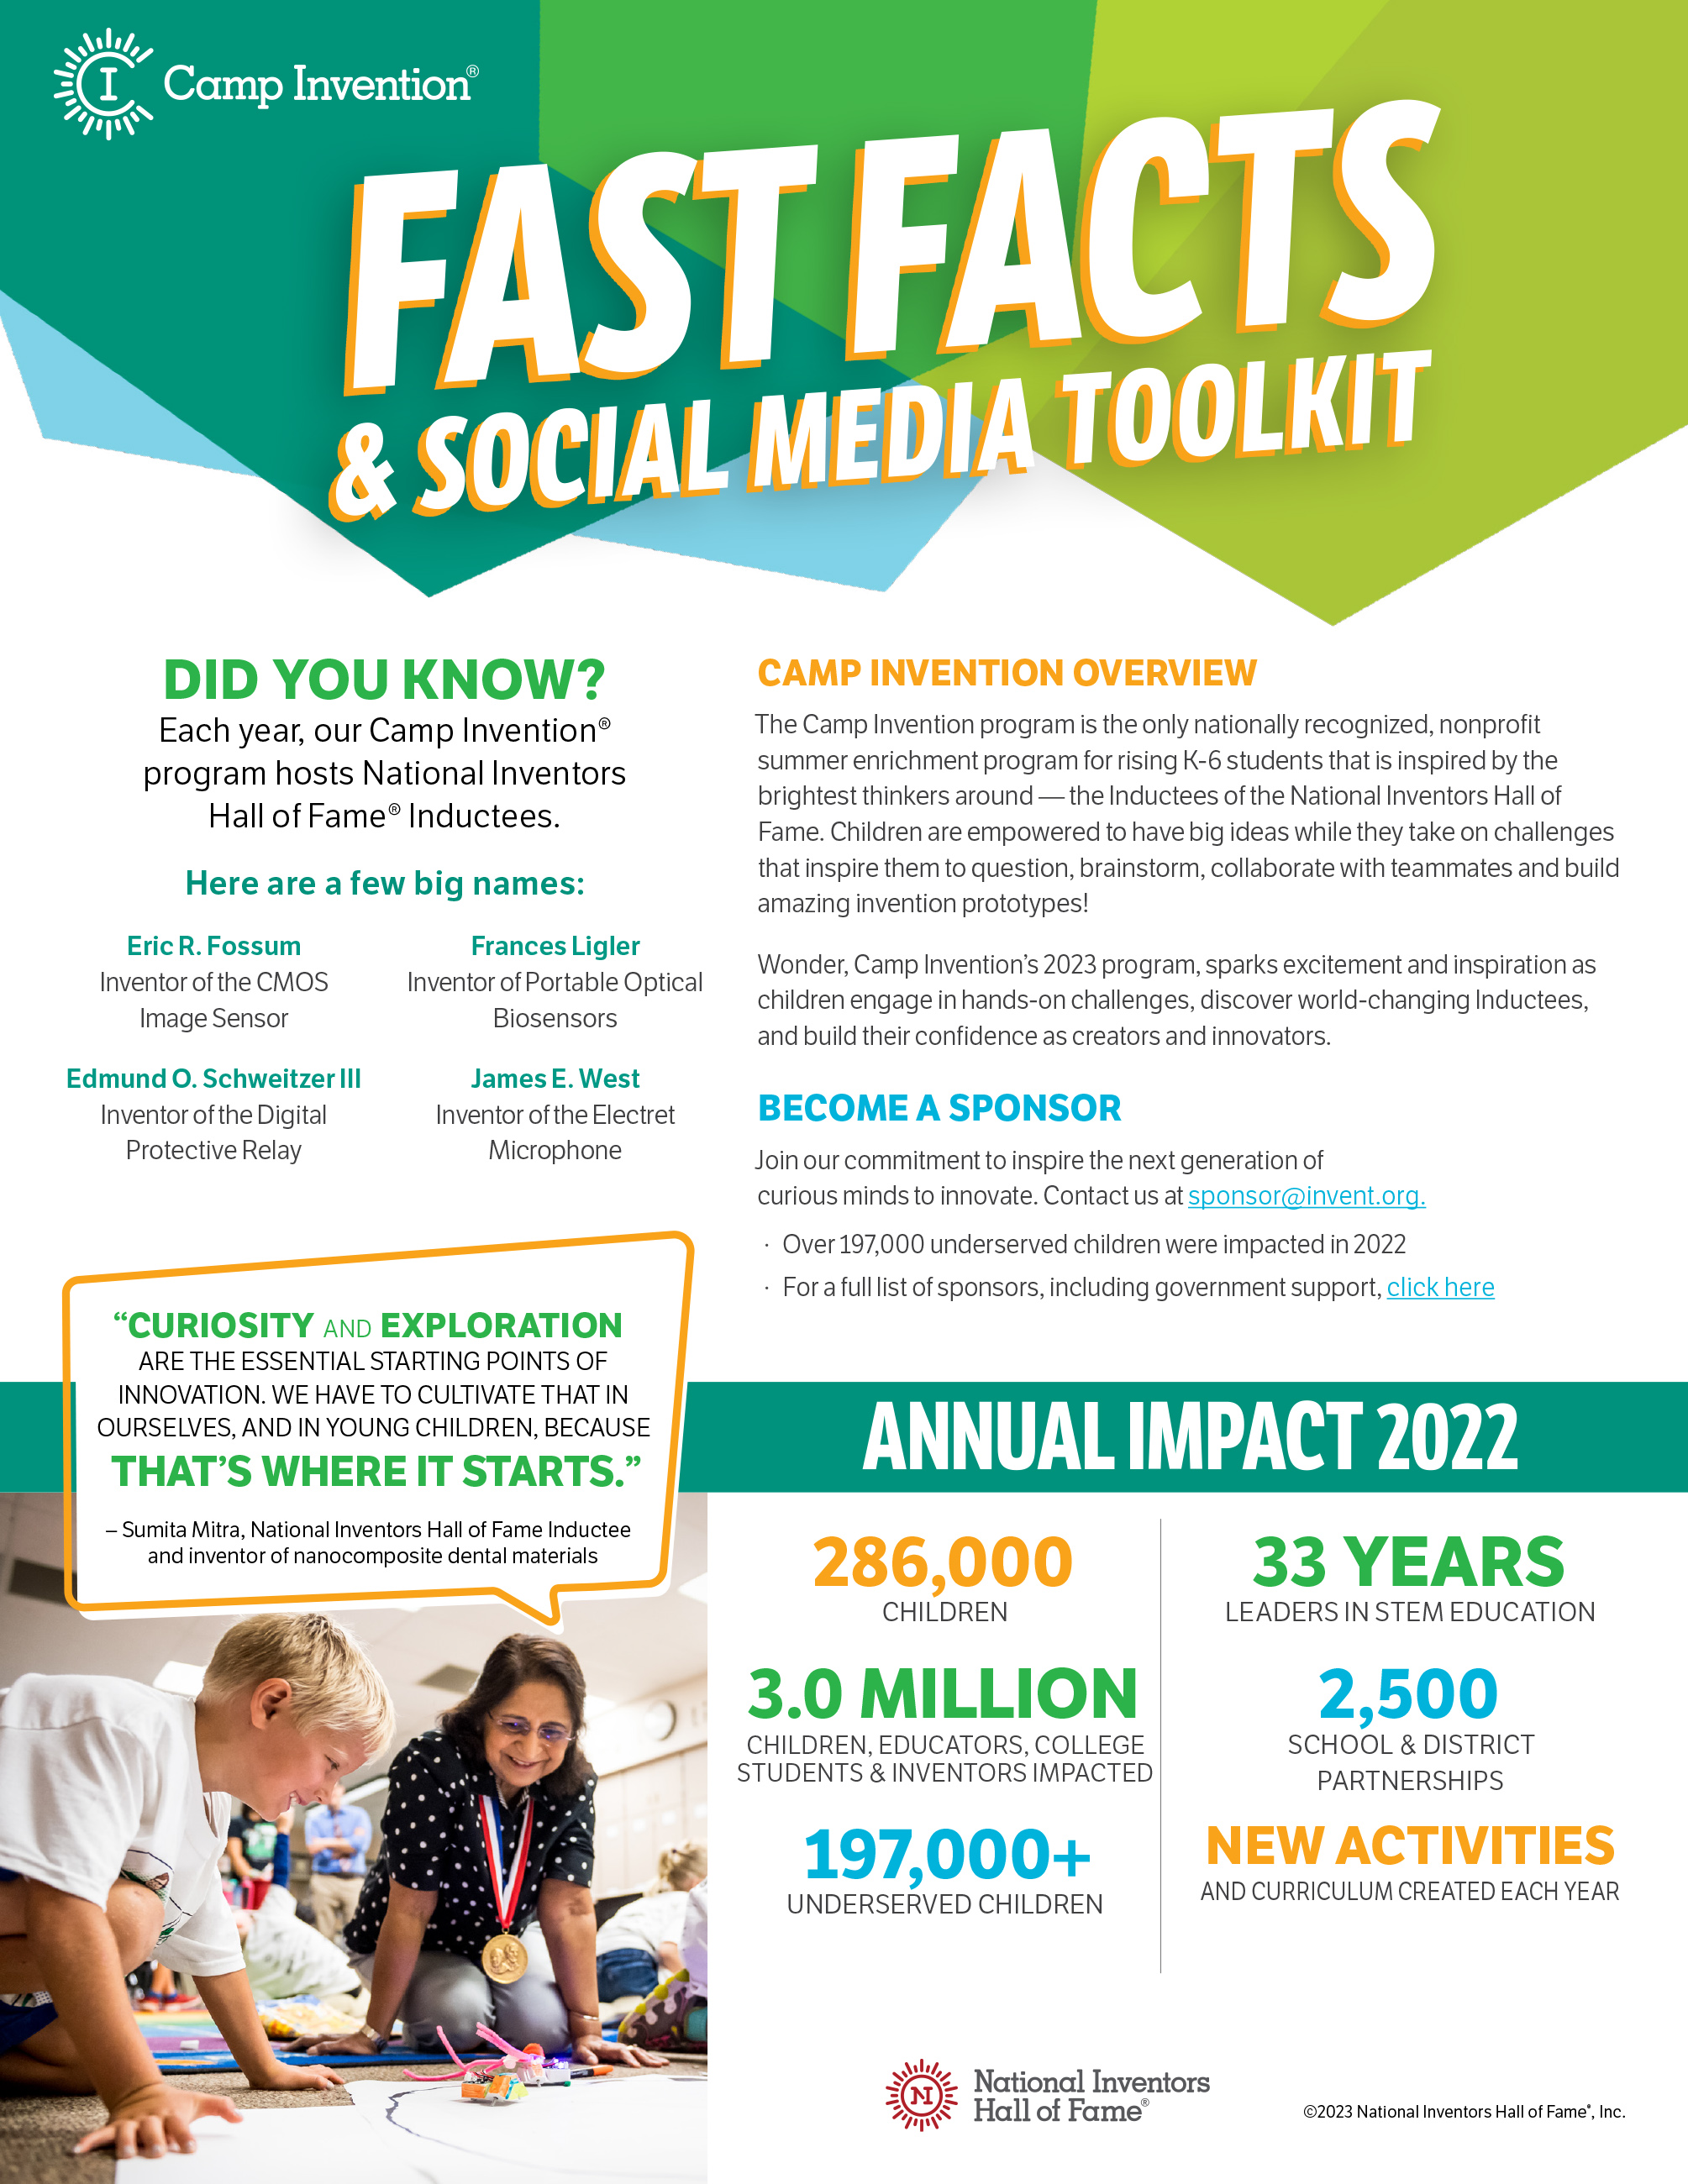 Camp Invention Fact Sheet and Social Media Toolkit